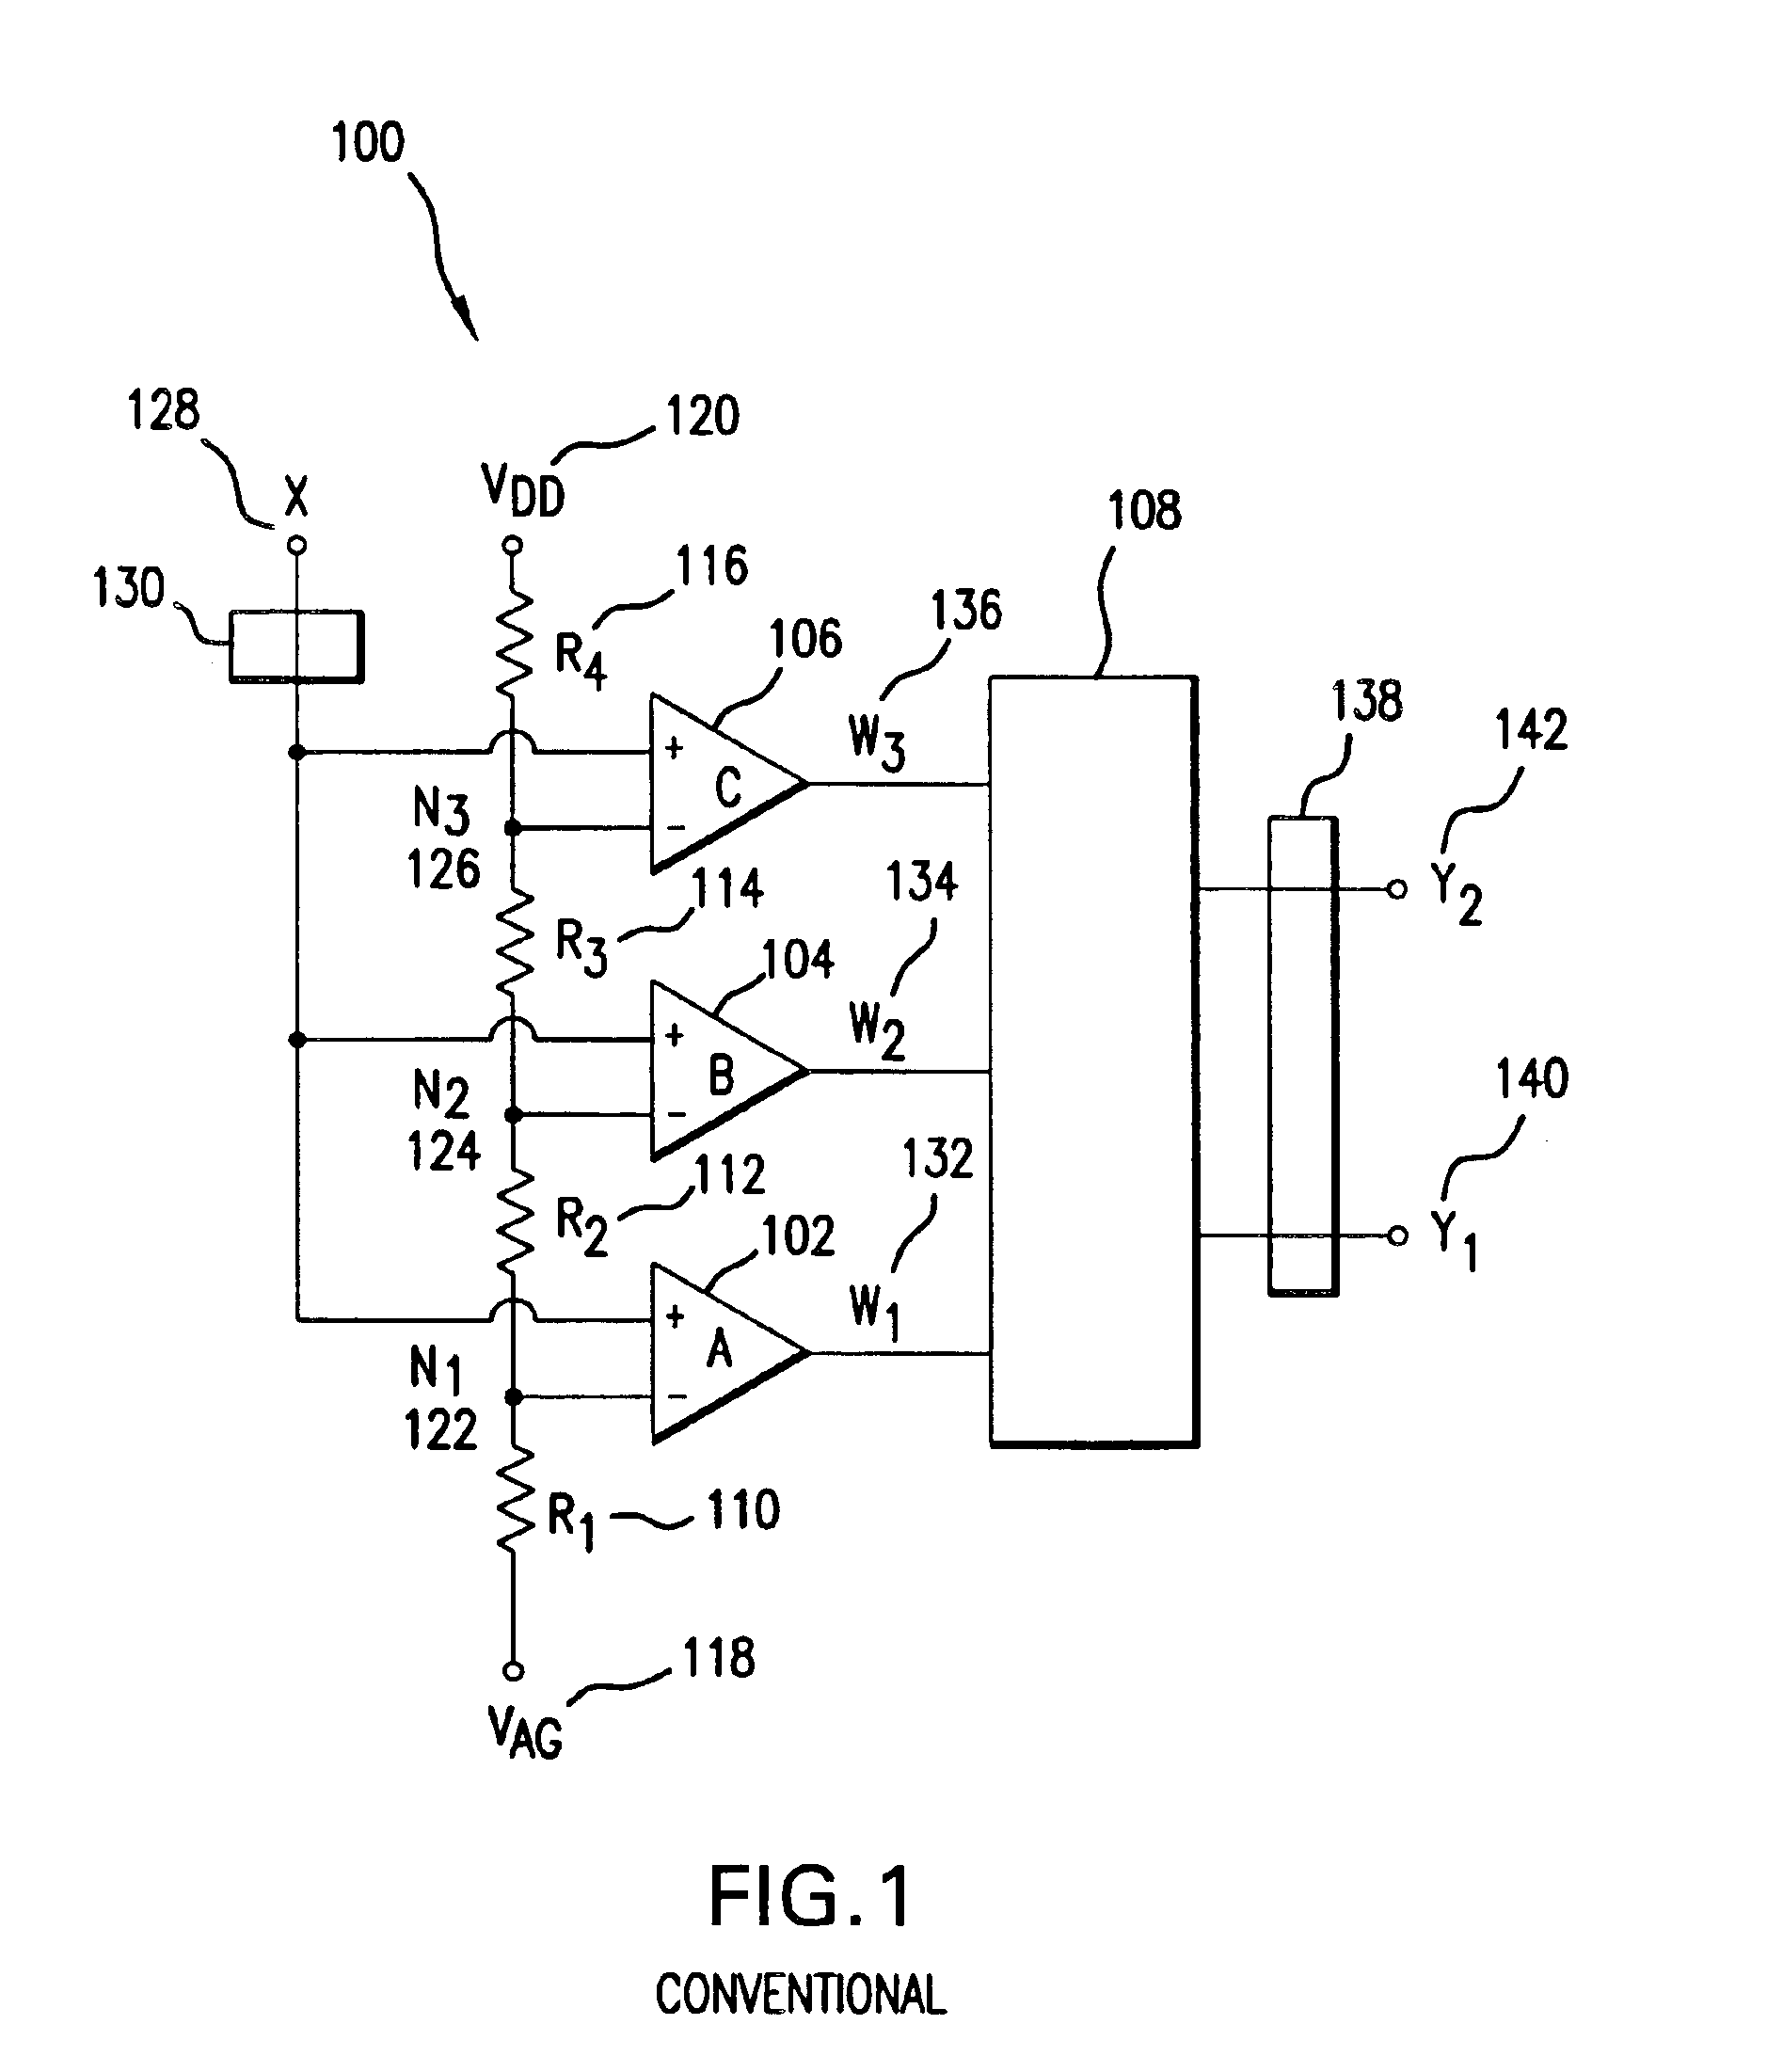 Method for increasing rate at which a comparator in a metastable condition transitions to a steady state